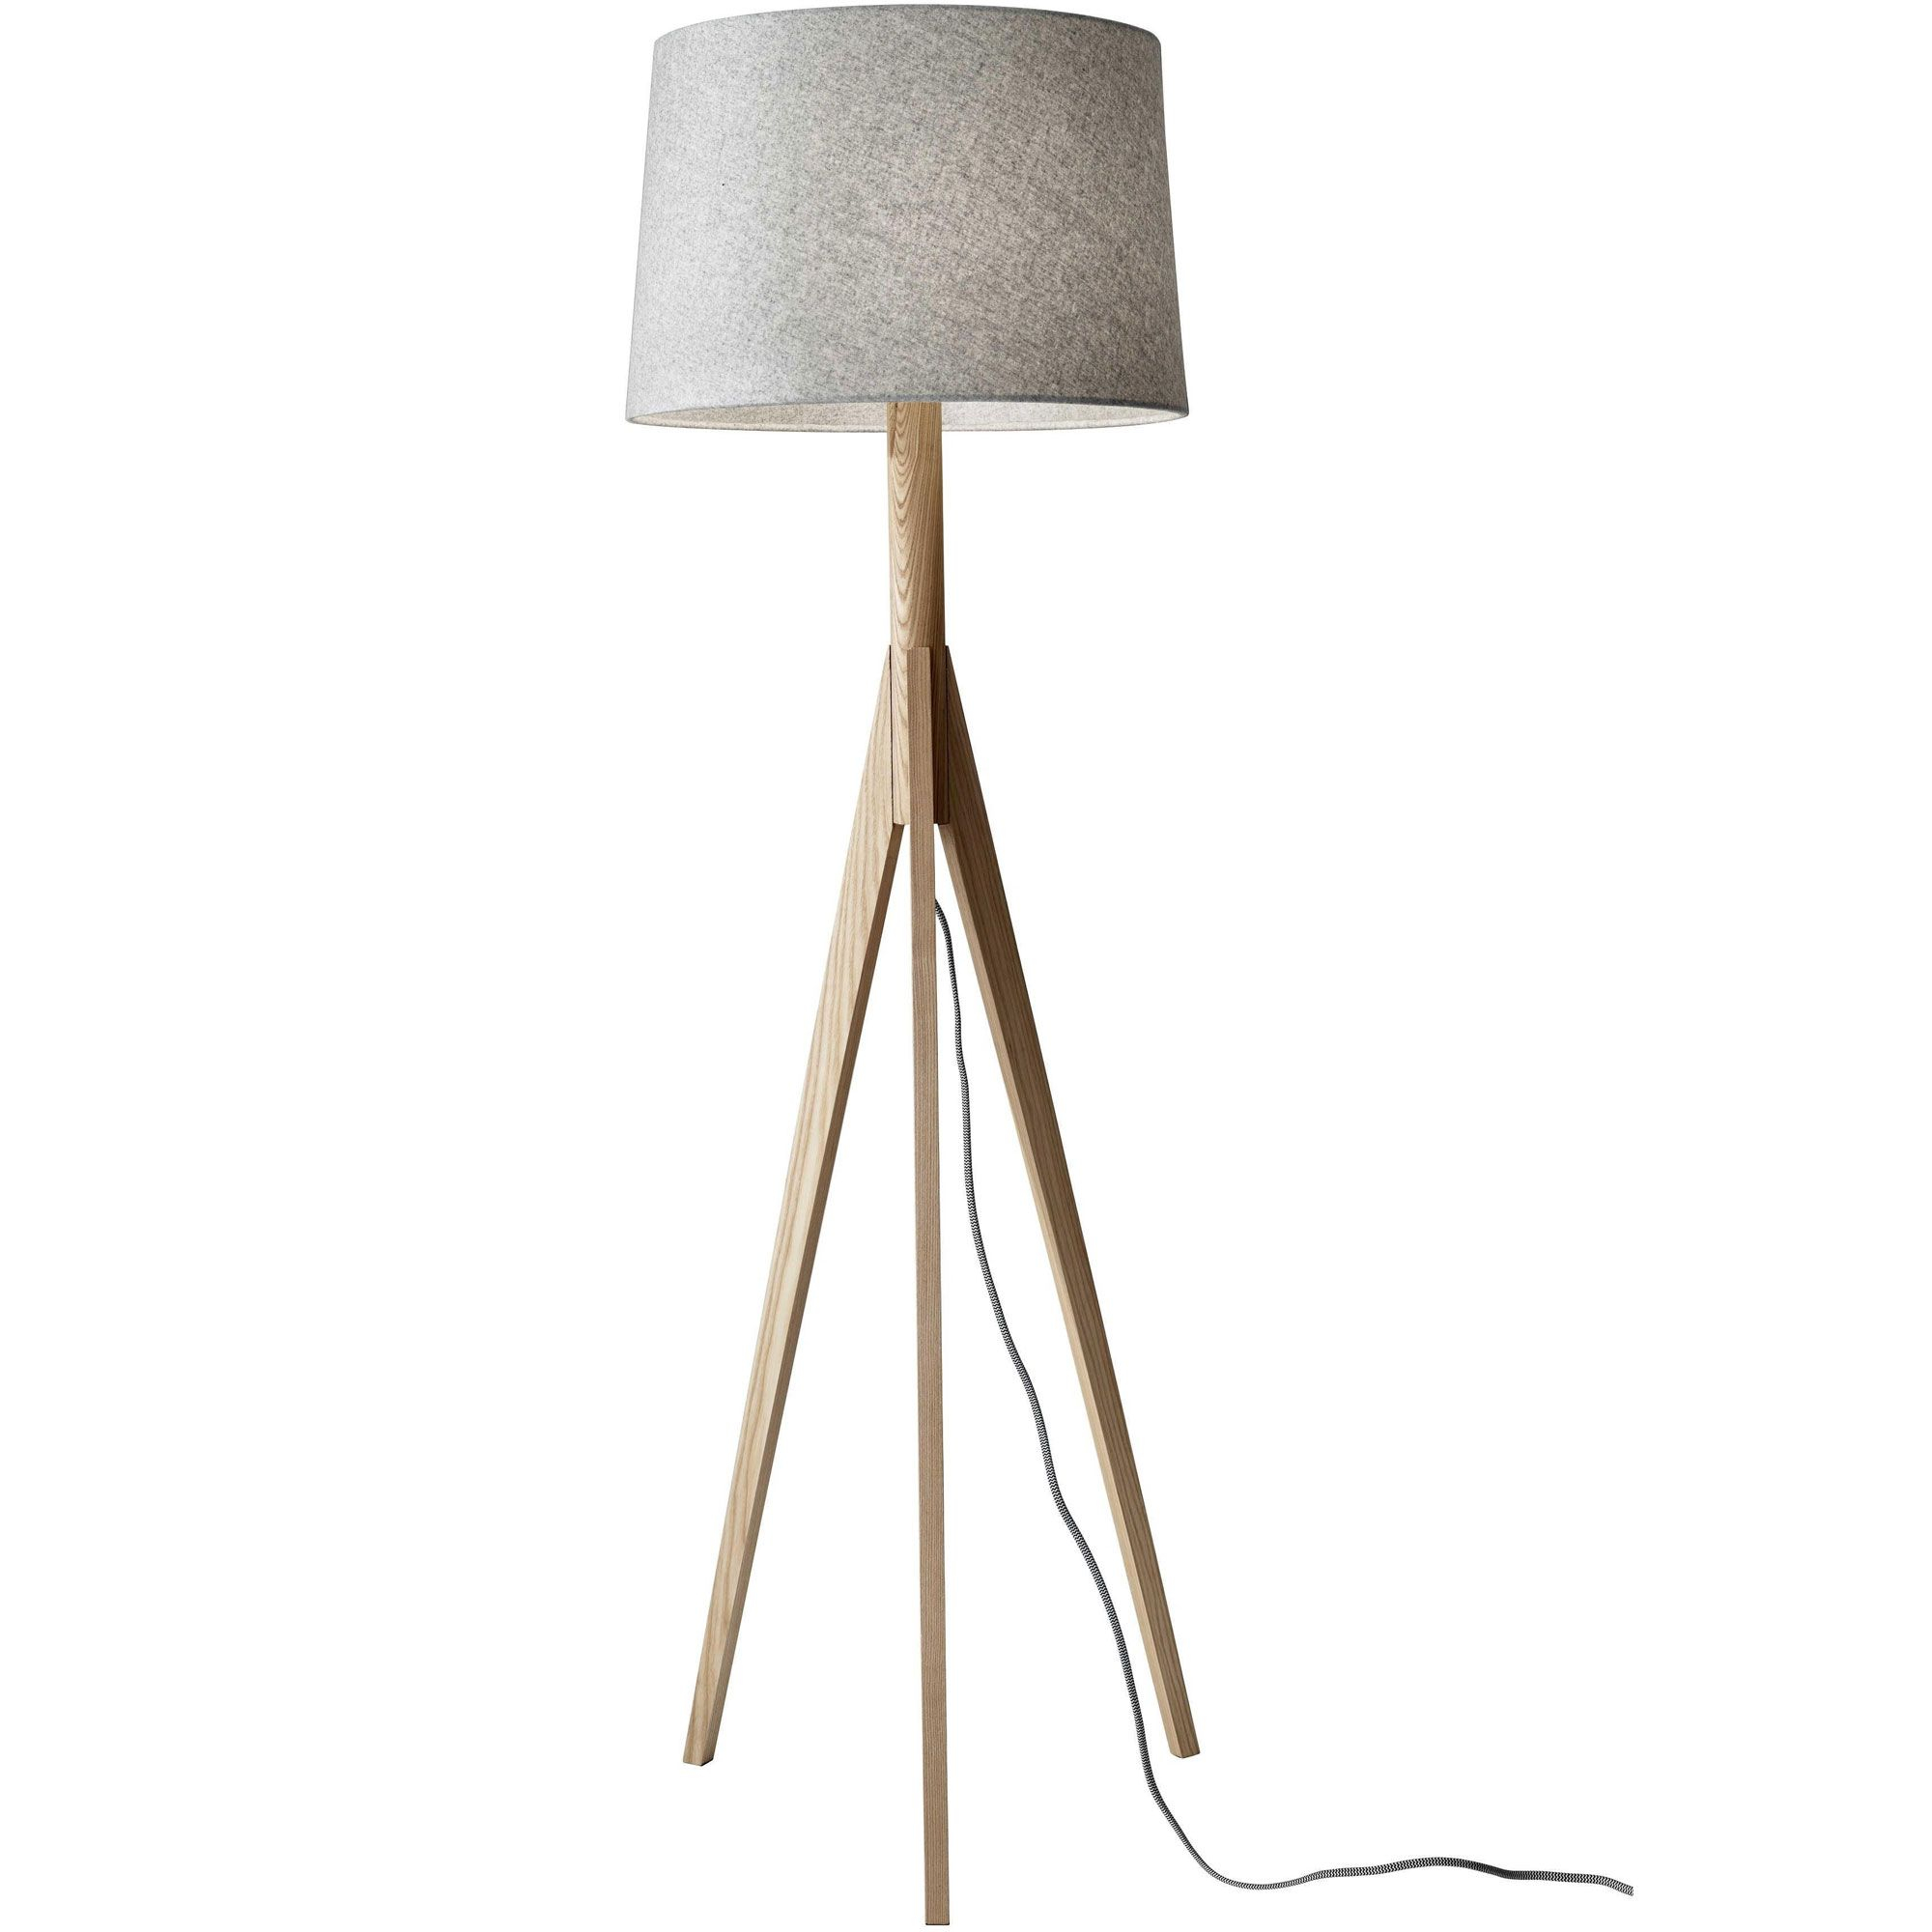 Eden Floor Lamp Out Of The Box Design Millenial Inspired inside sizing 2000 X 2000